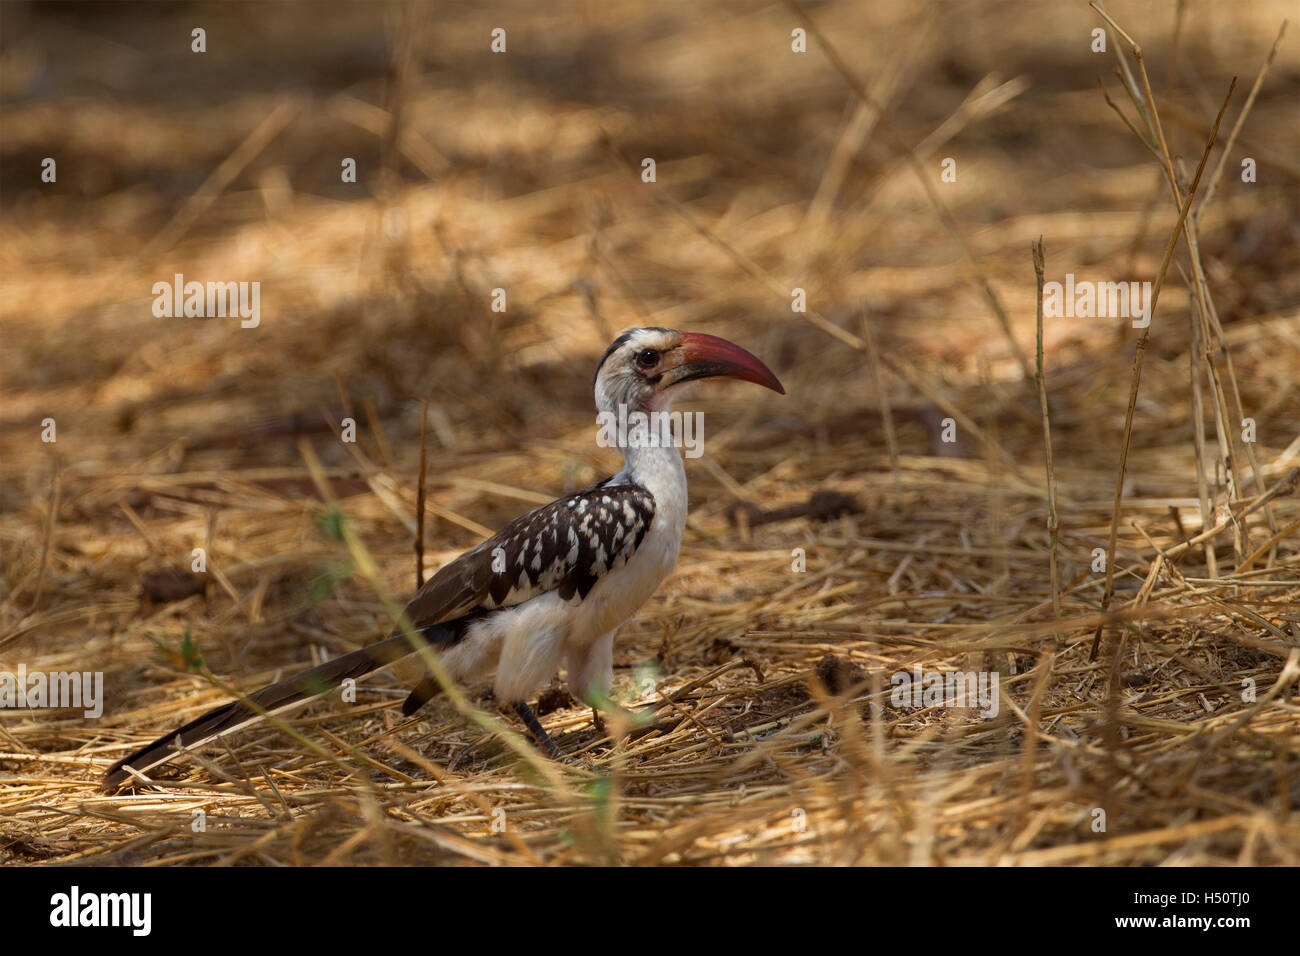 A northern red-billed hornbill on the ground Stock Photo